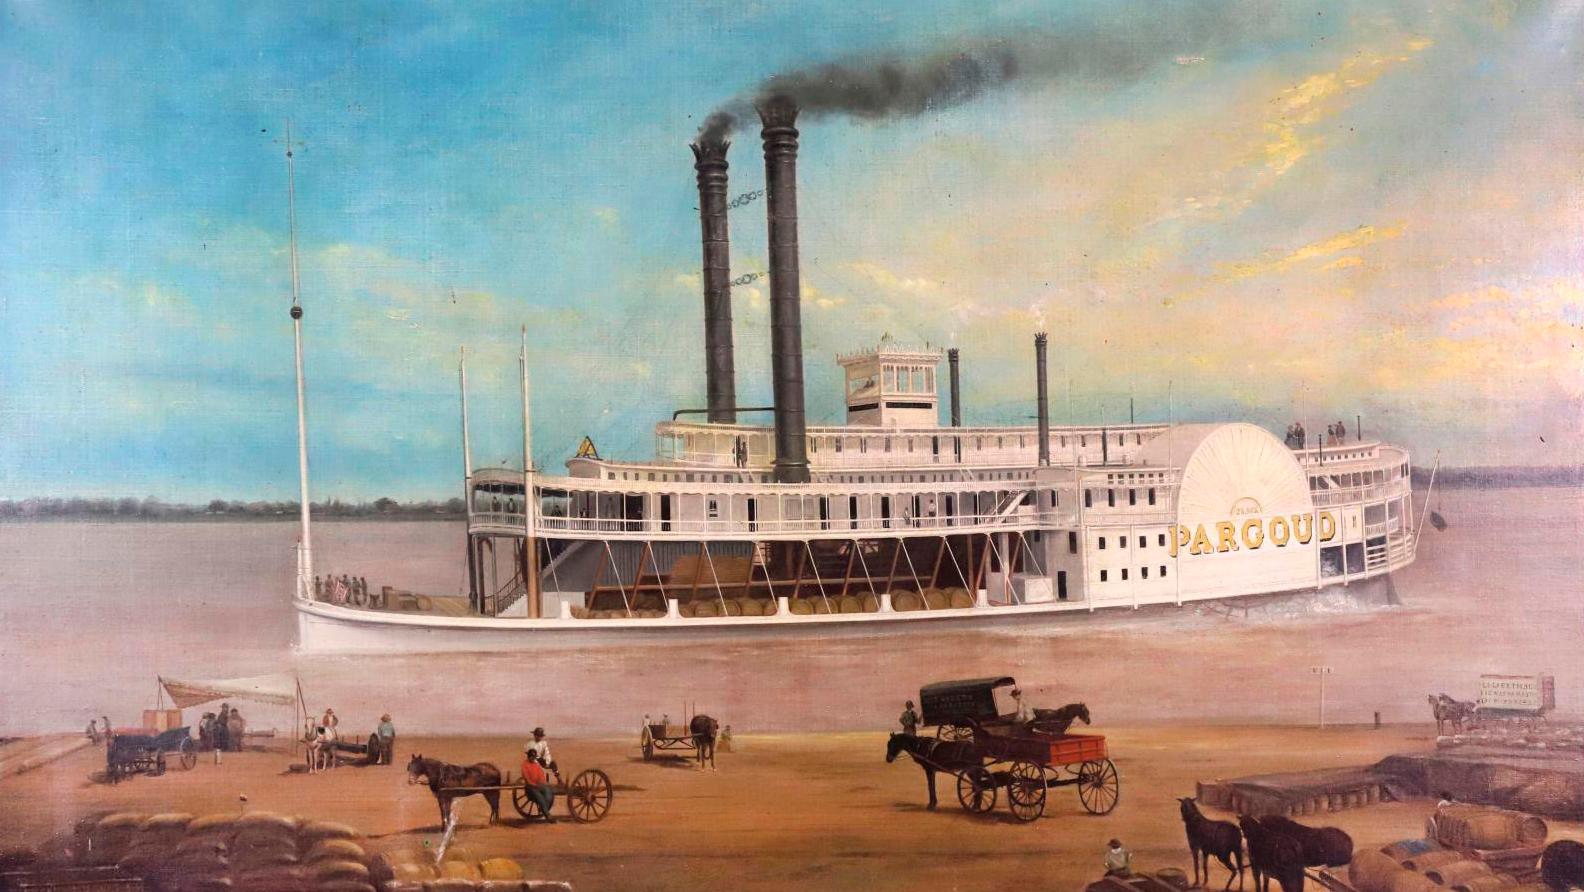 Lewis Herring (c. 1836-1869), The Steamboat Pargoud Before a Busy Cotton-Loading... A Medal-Winning Painting by American Artist Lewis Herring